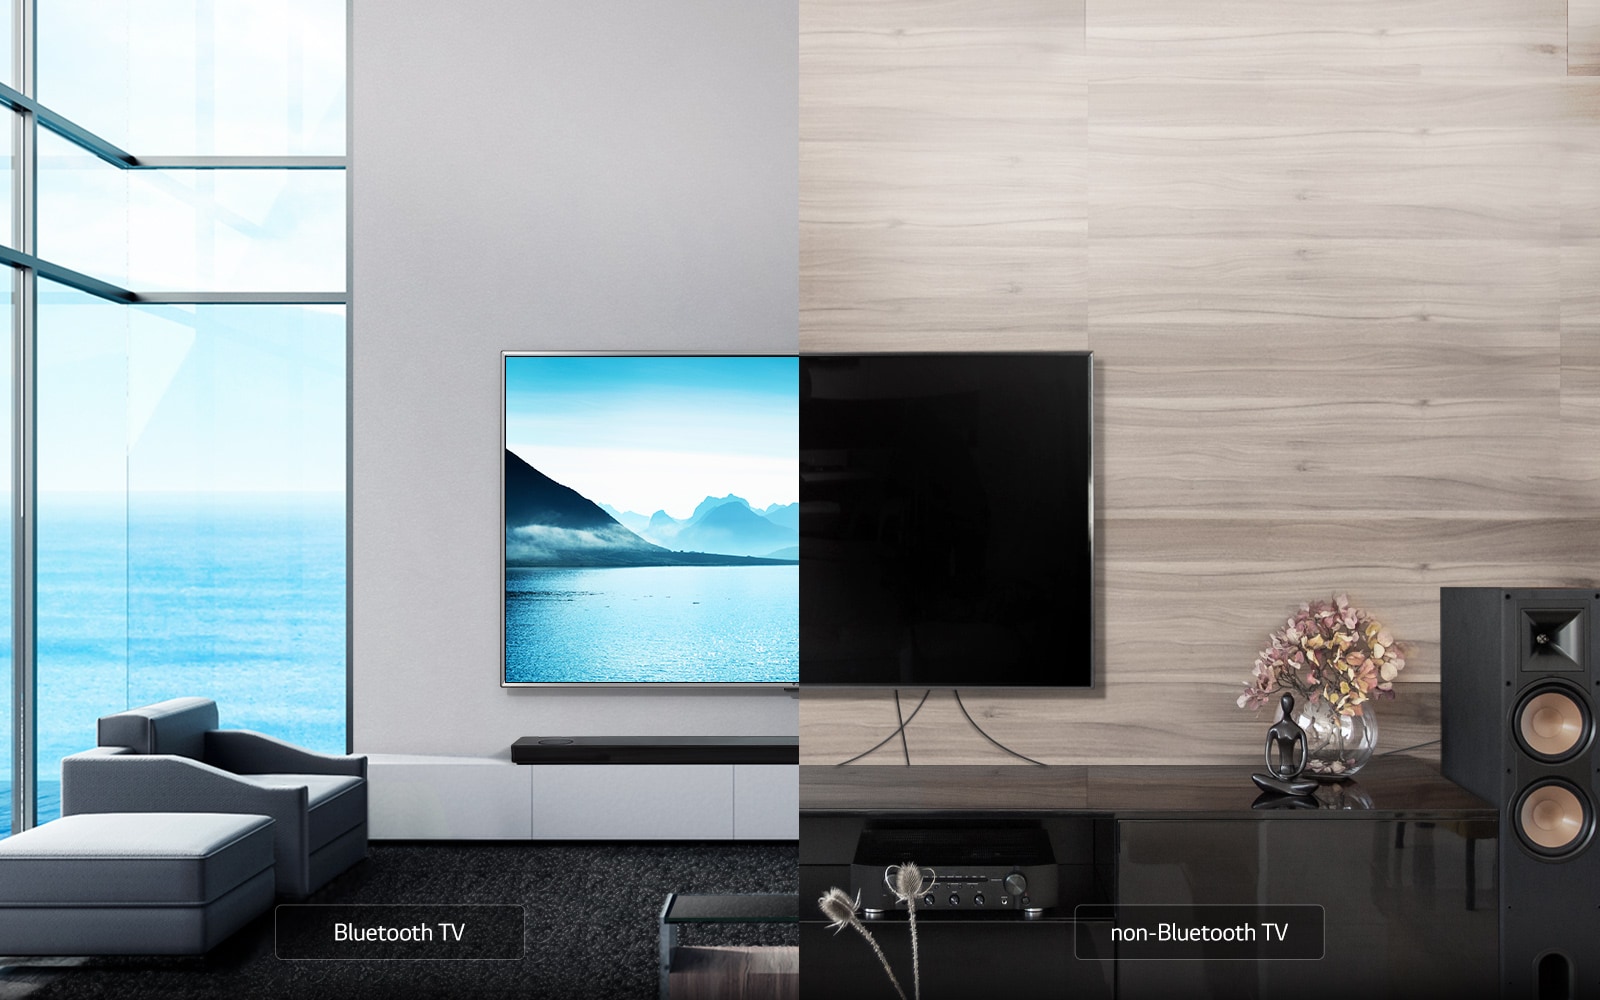 LG Hassle-free TV with wireless Smart TV